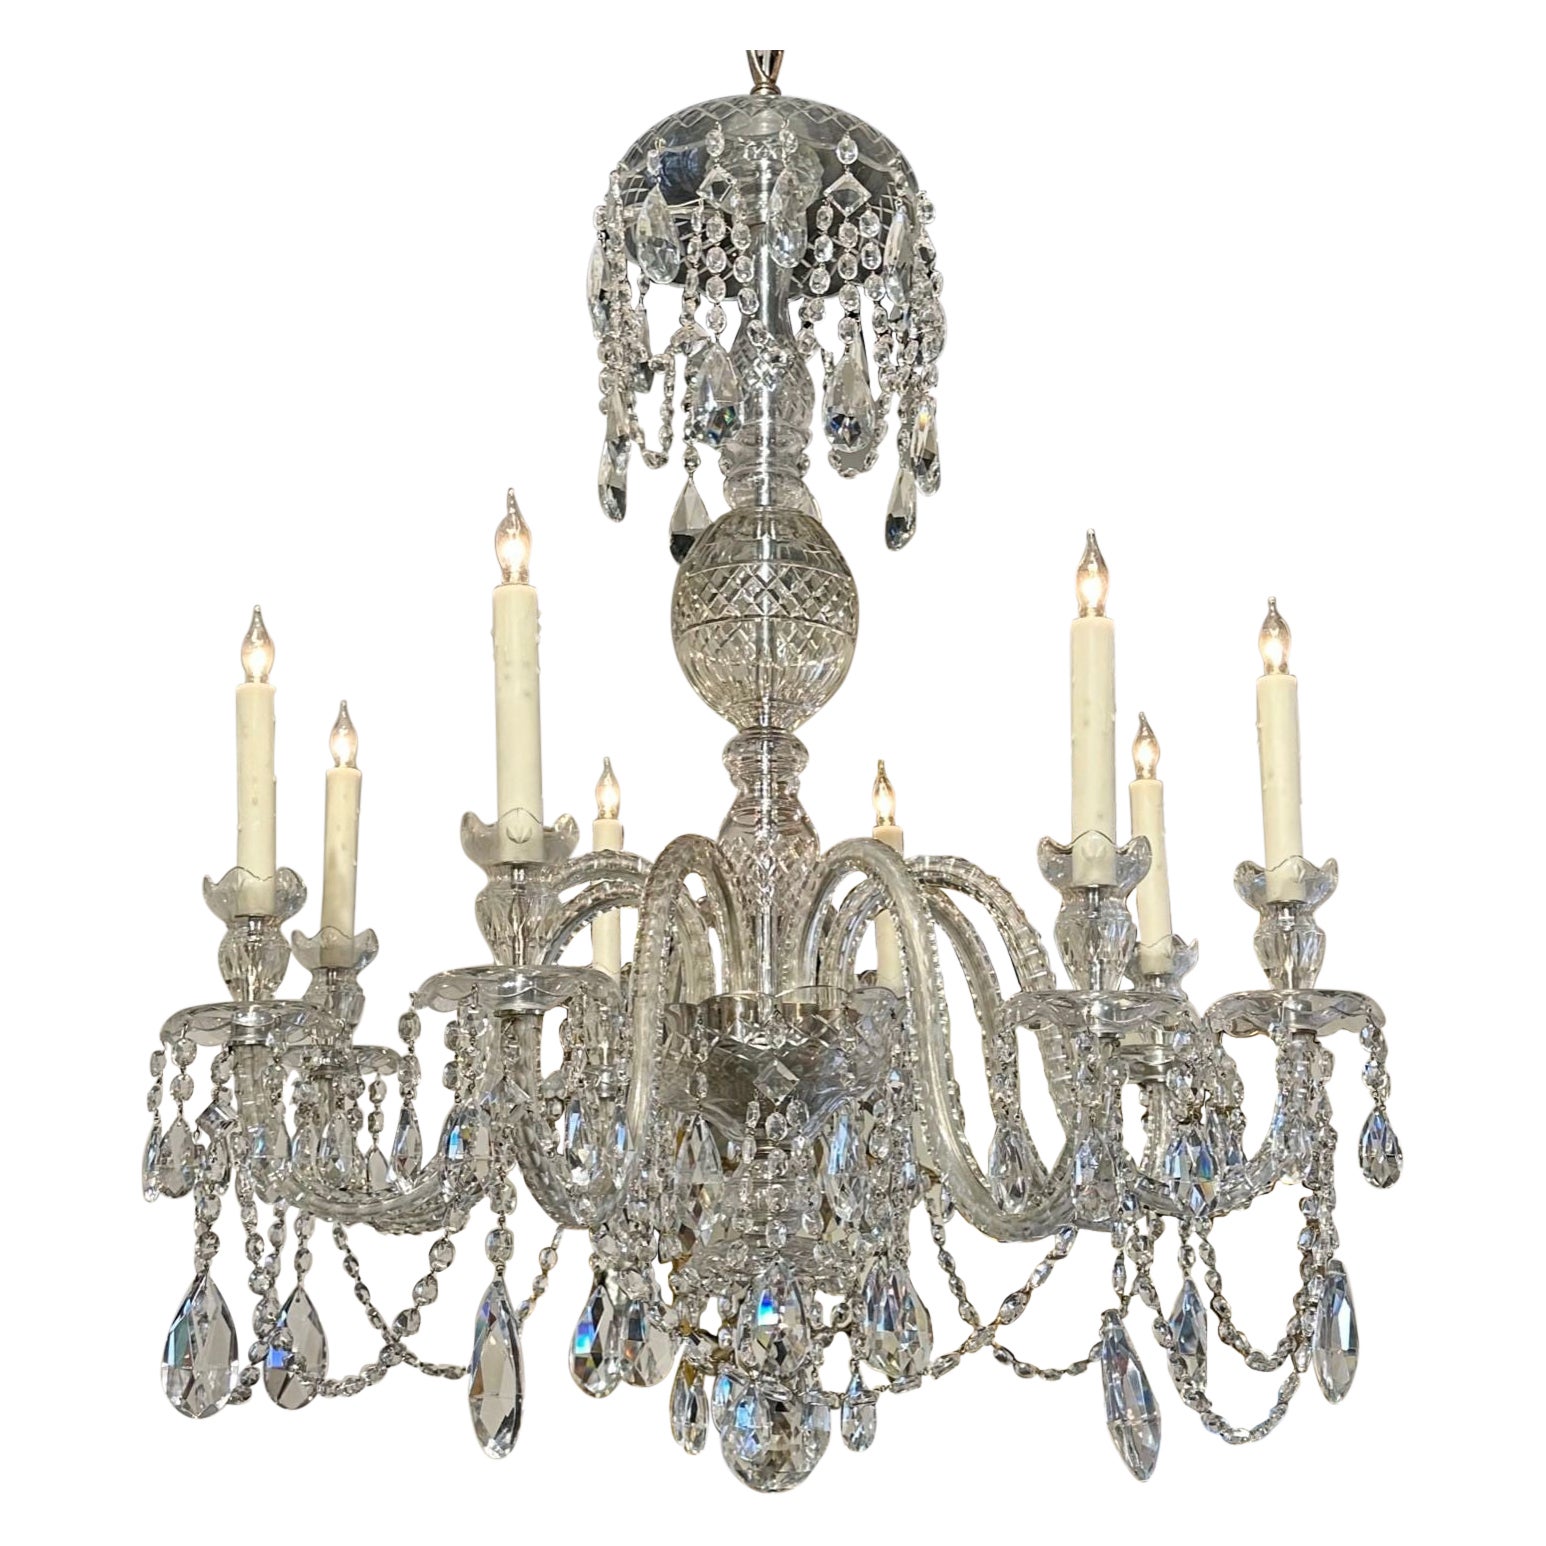 English Waterford Chandelier For Sale